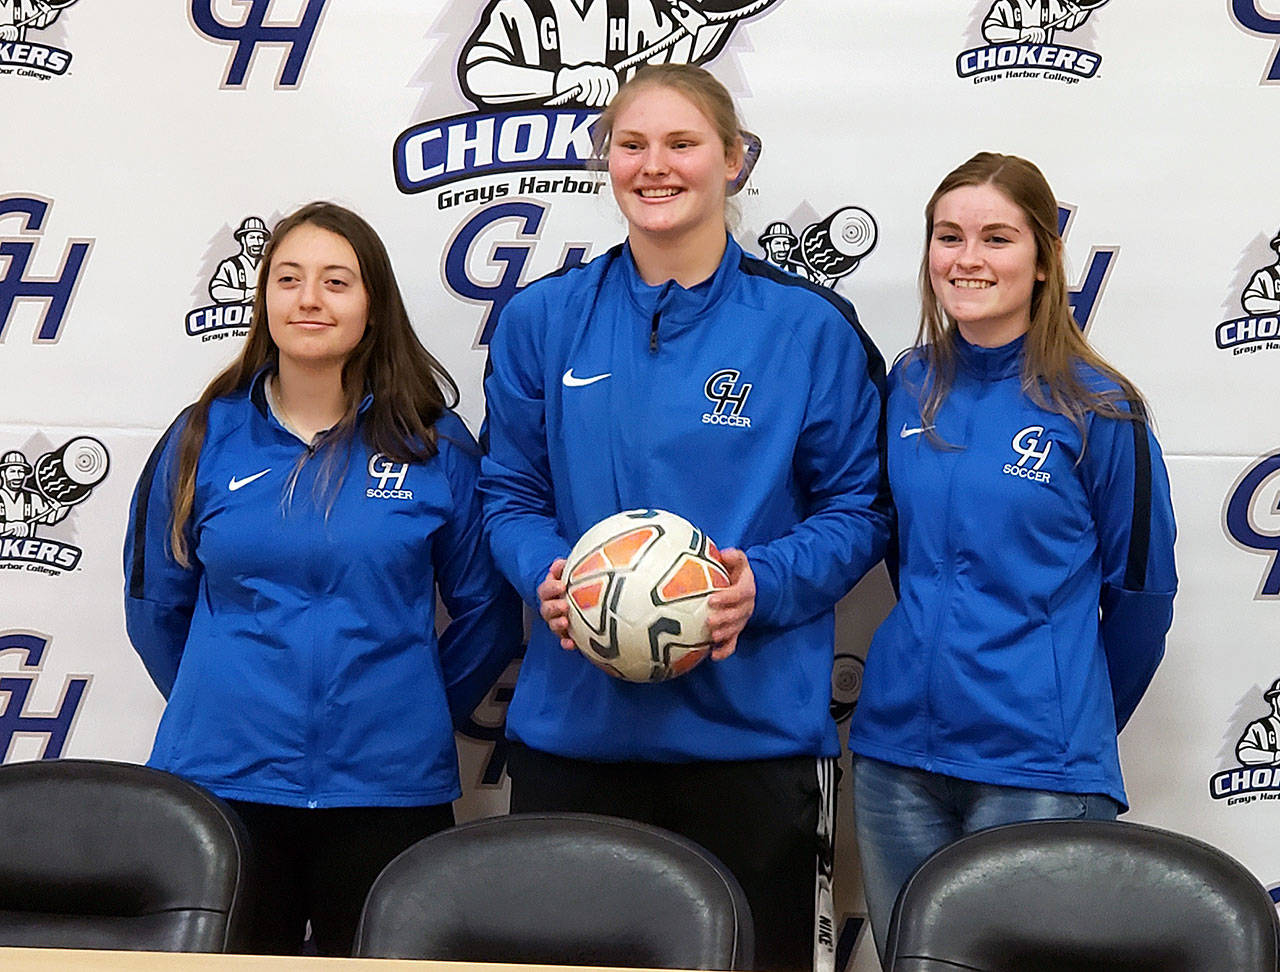 Ocosta High School’s Kristi Raffelson, center, and Mercedes Denny, right, stand along side former Ocosta player and current Grays Harbor midfielder Adrianna Huerta after a signing ceremony at Grays Harbor College on Thursday. (Ryan Sparks | Grays Harbor News Group)